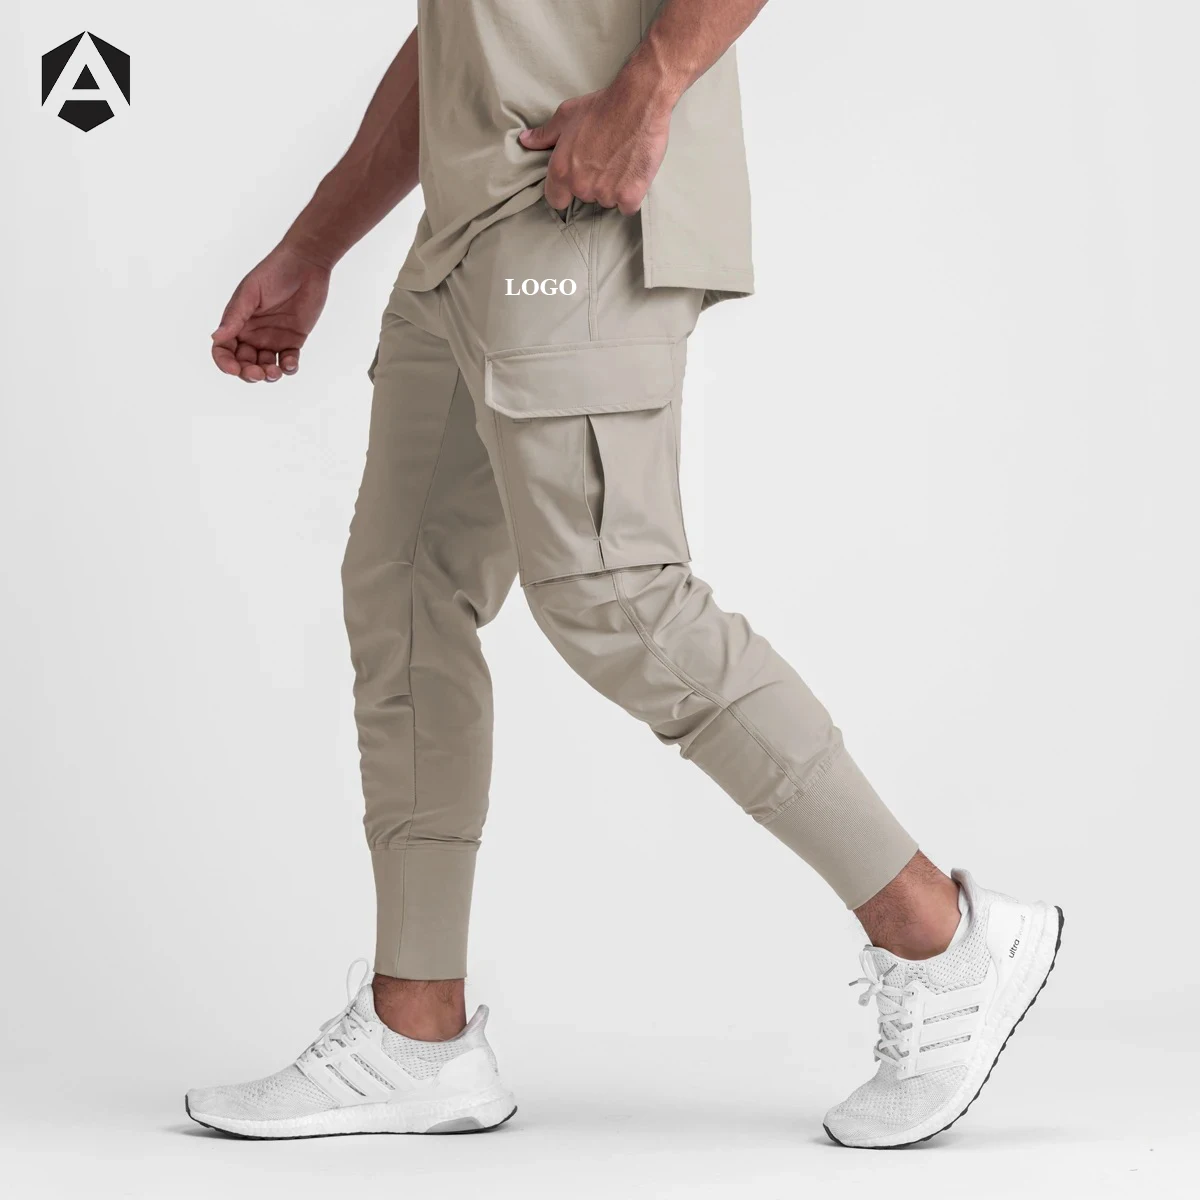 Buy Kiddopanti Pack Of 2 Full Length Track Pants With Side Pockets Black   Khaki Brown for Both 1012Years Online in India Shop at FirstCrycom   11752287